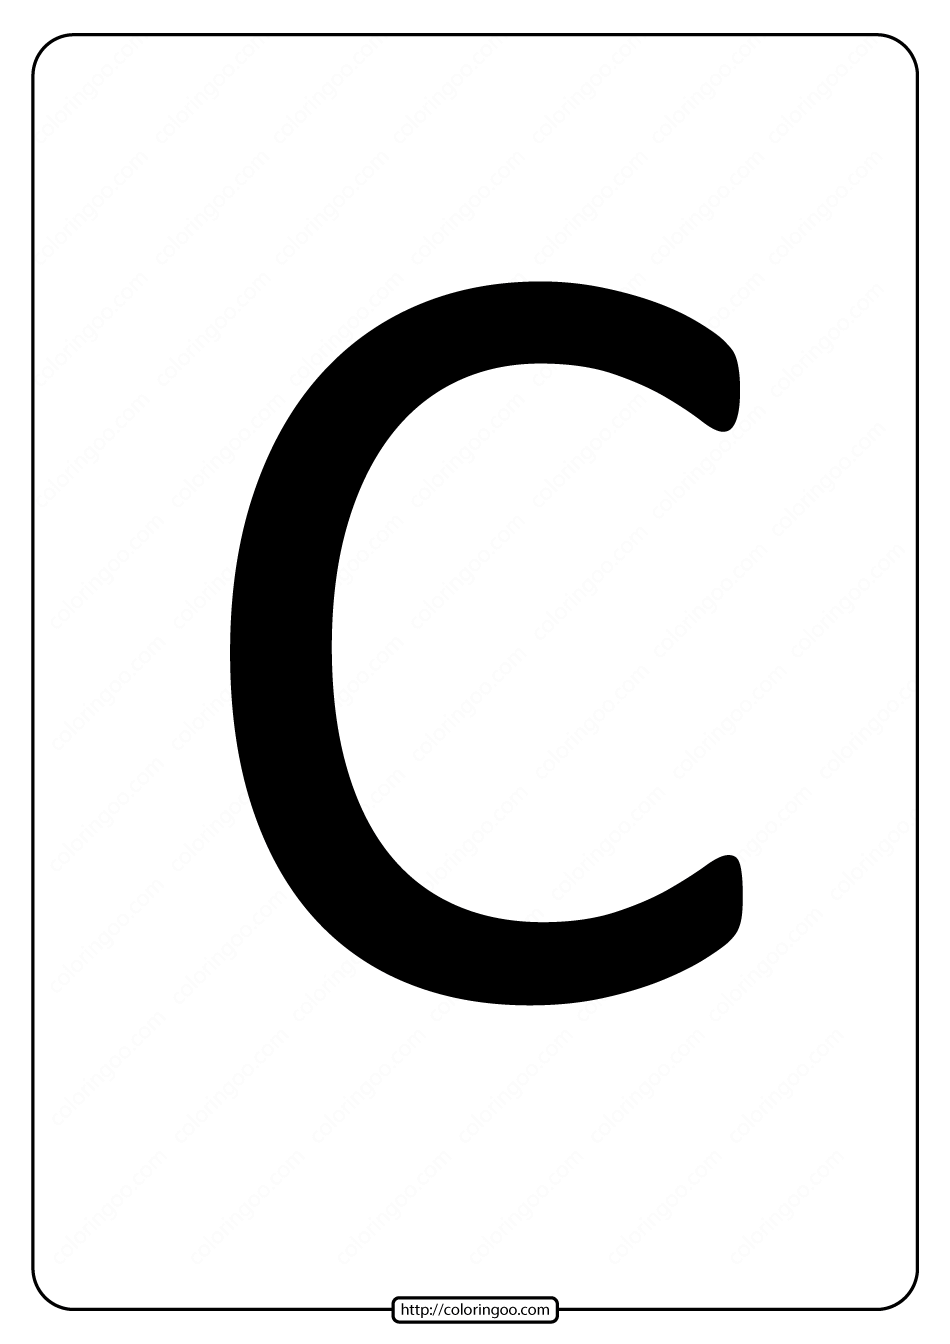 printable-a4-size-uppercase-letters-c-worksheet